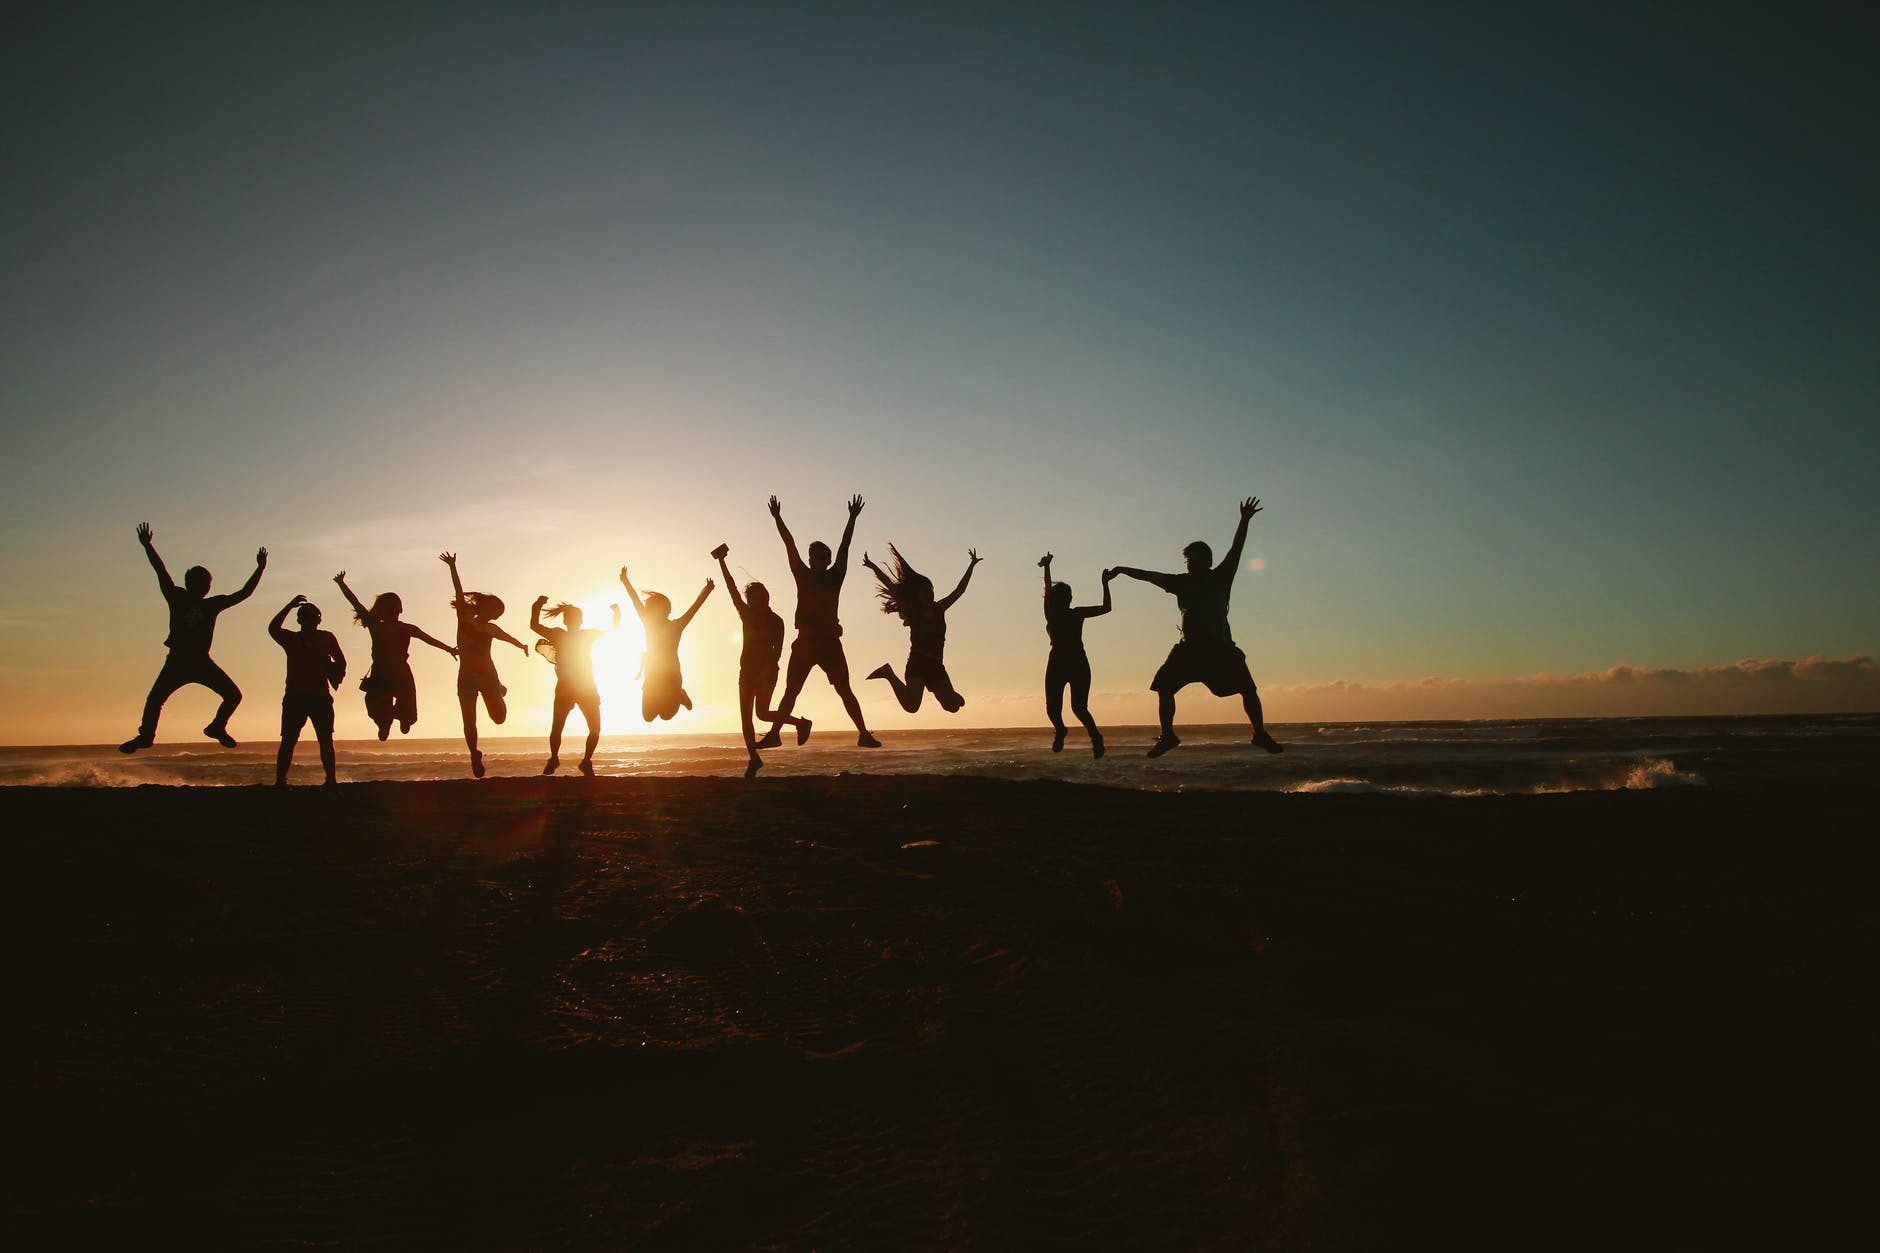 Group of people jumping into the air on a beach at sundown